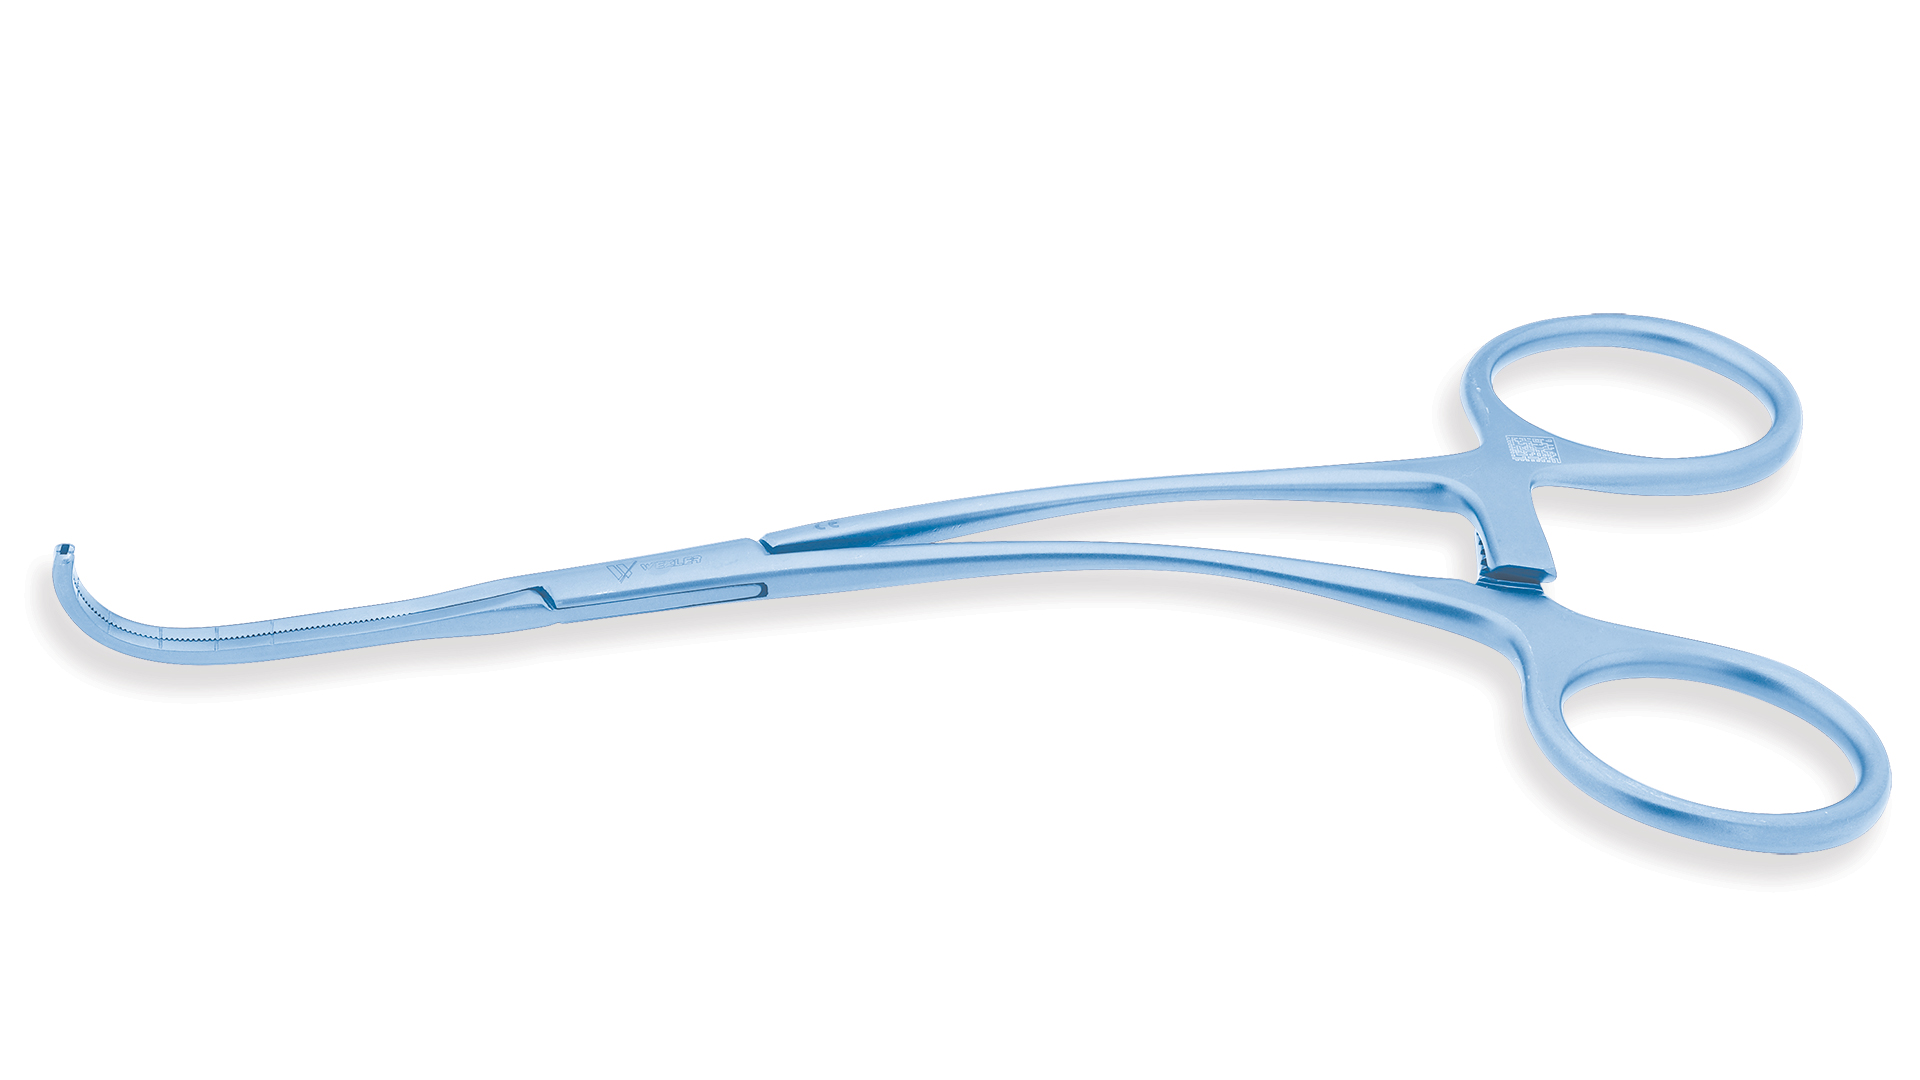 Castaneda Clamp - Curved Cooley Atraumatic jaws